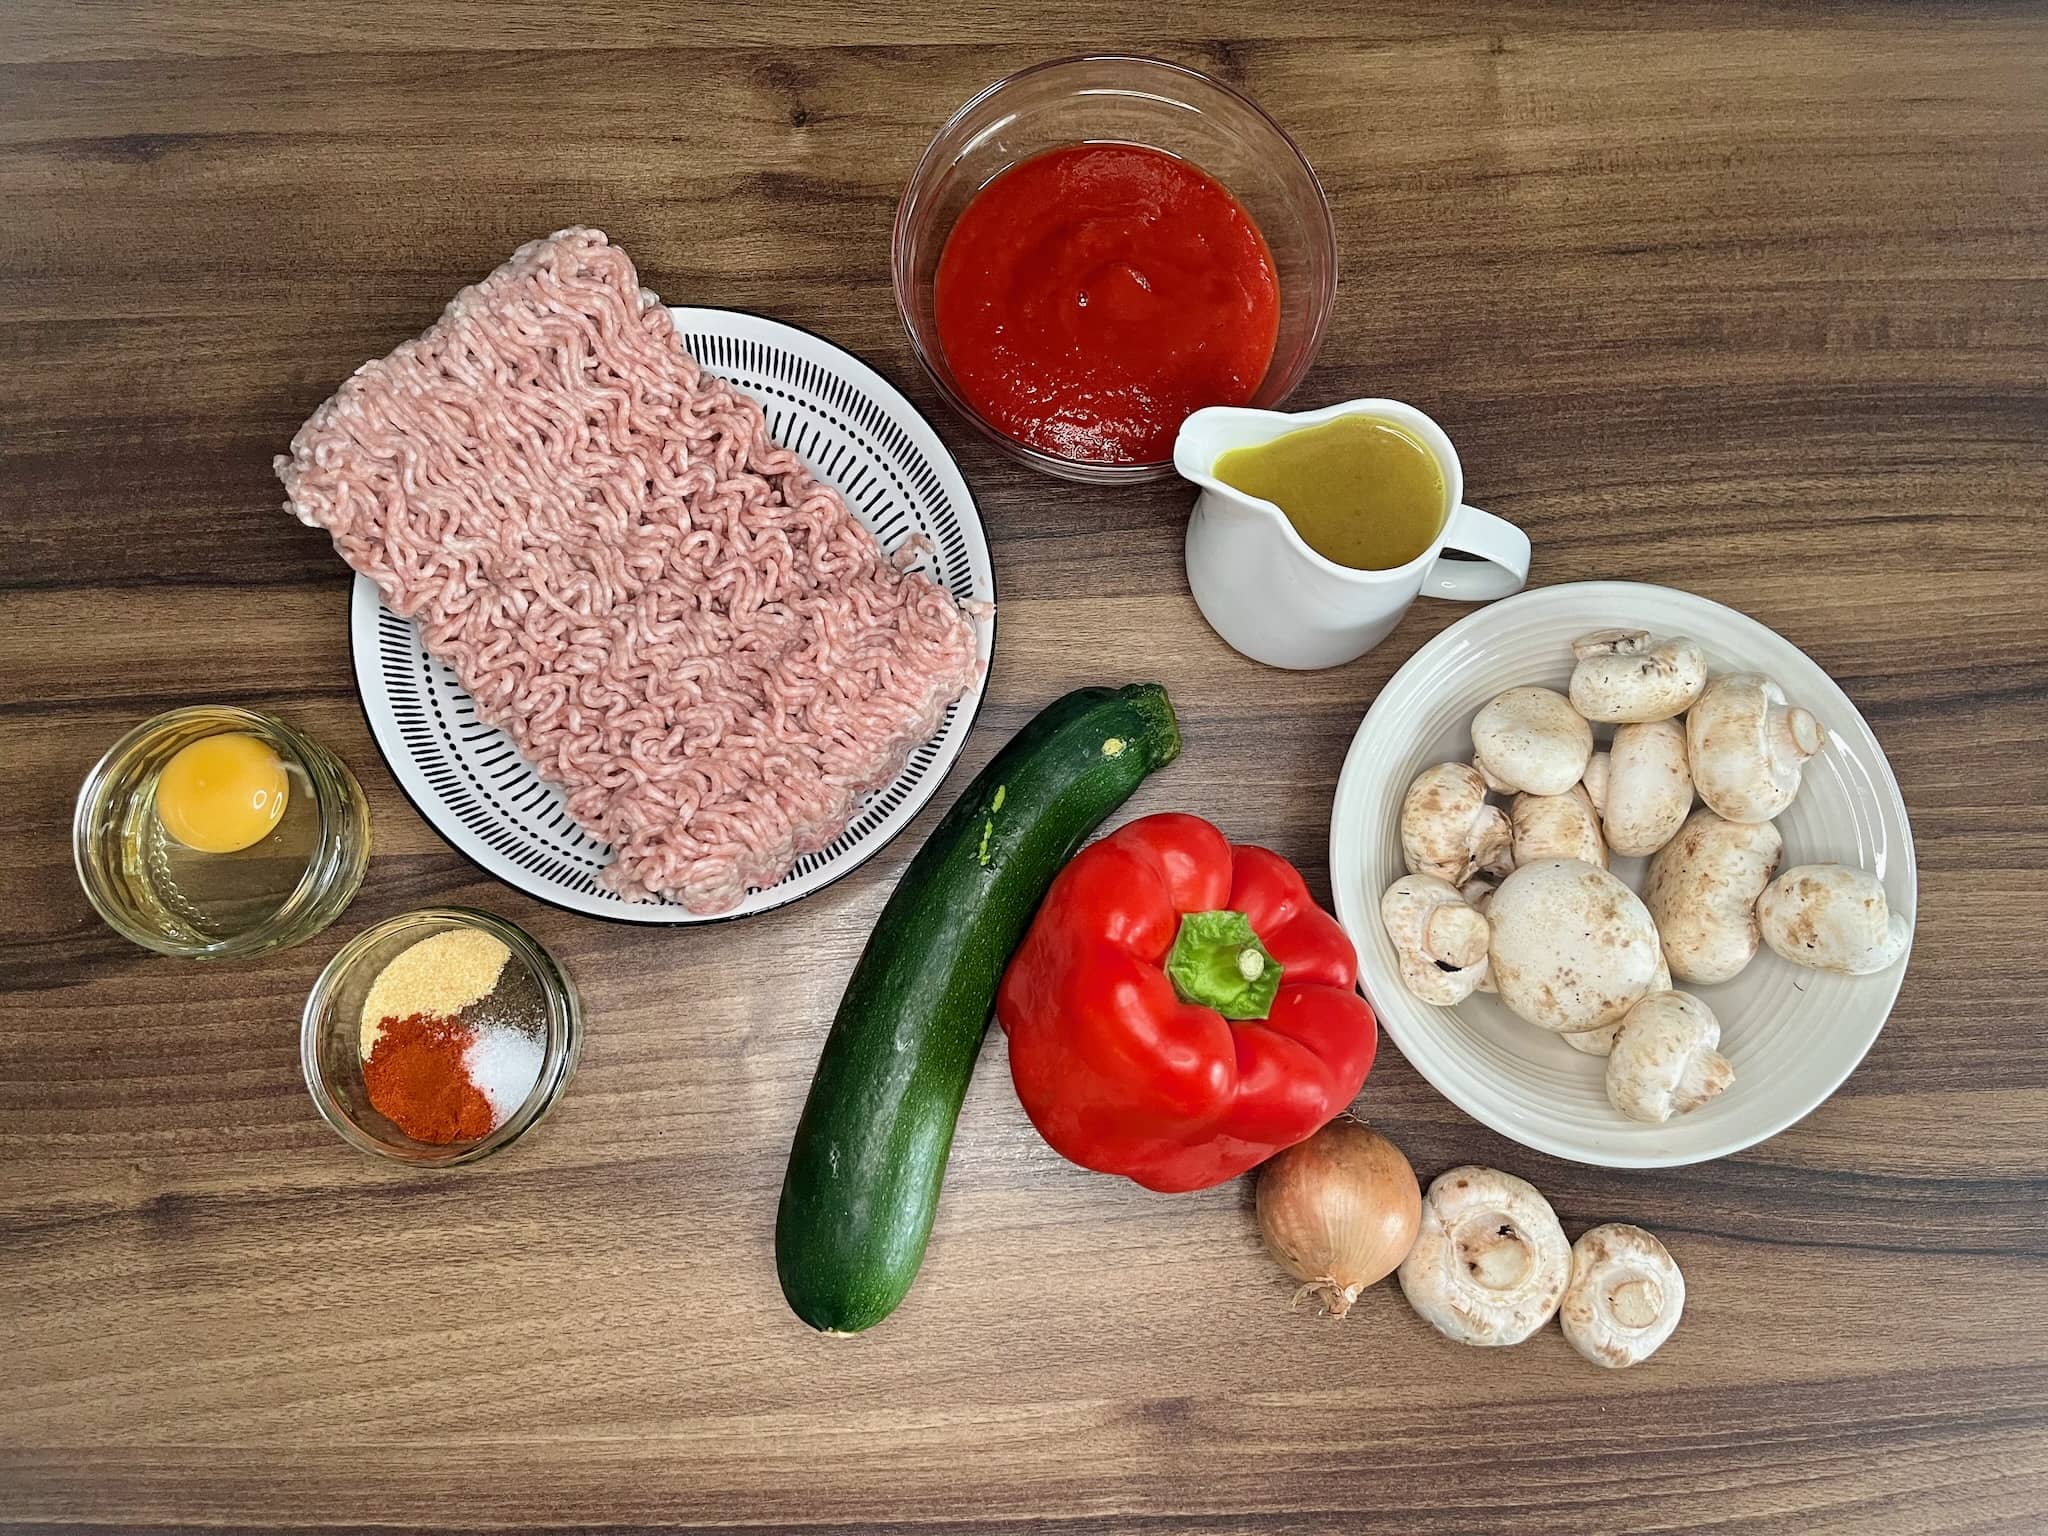 The ingredients for Meatballs in Vegetable Stew are all laid out on the table, ready to be cooked.